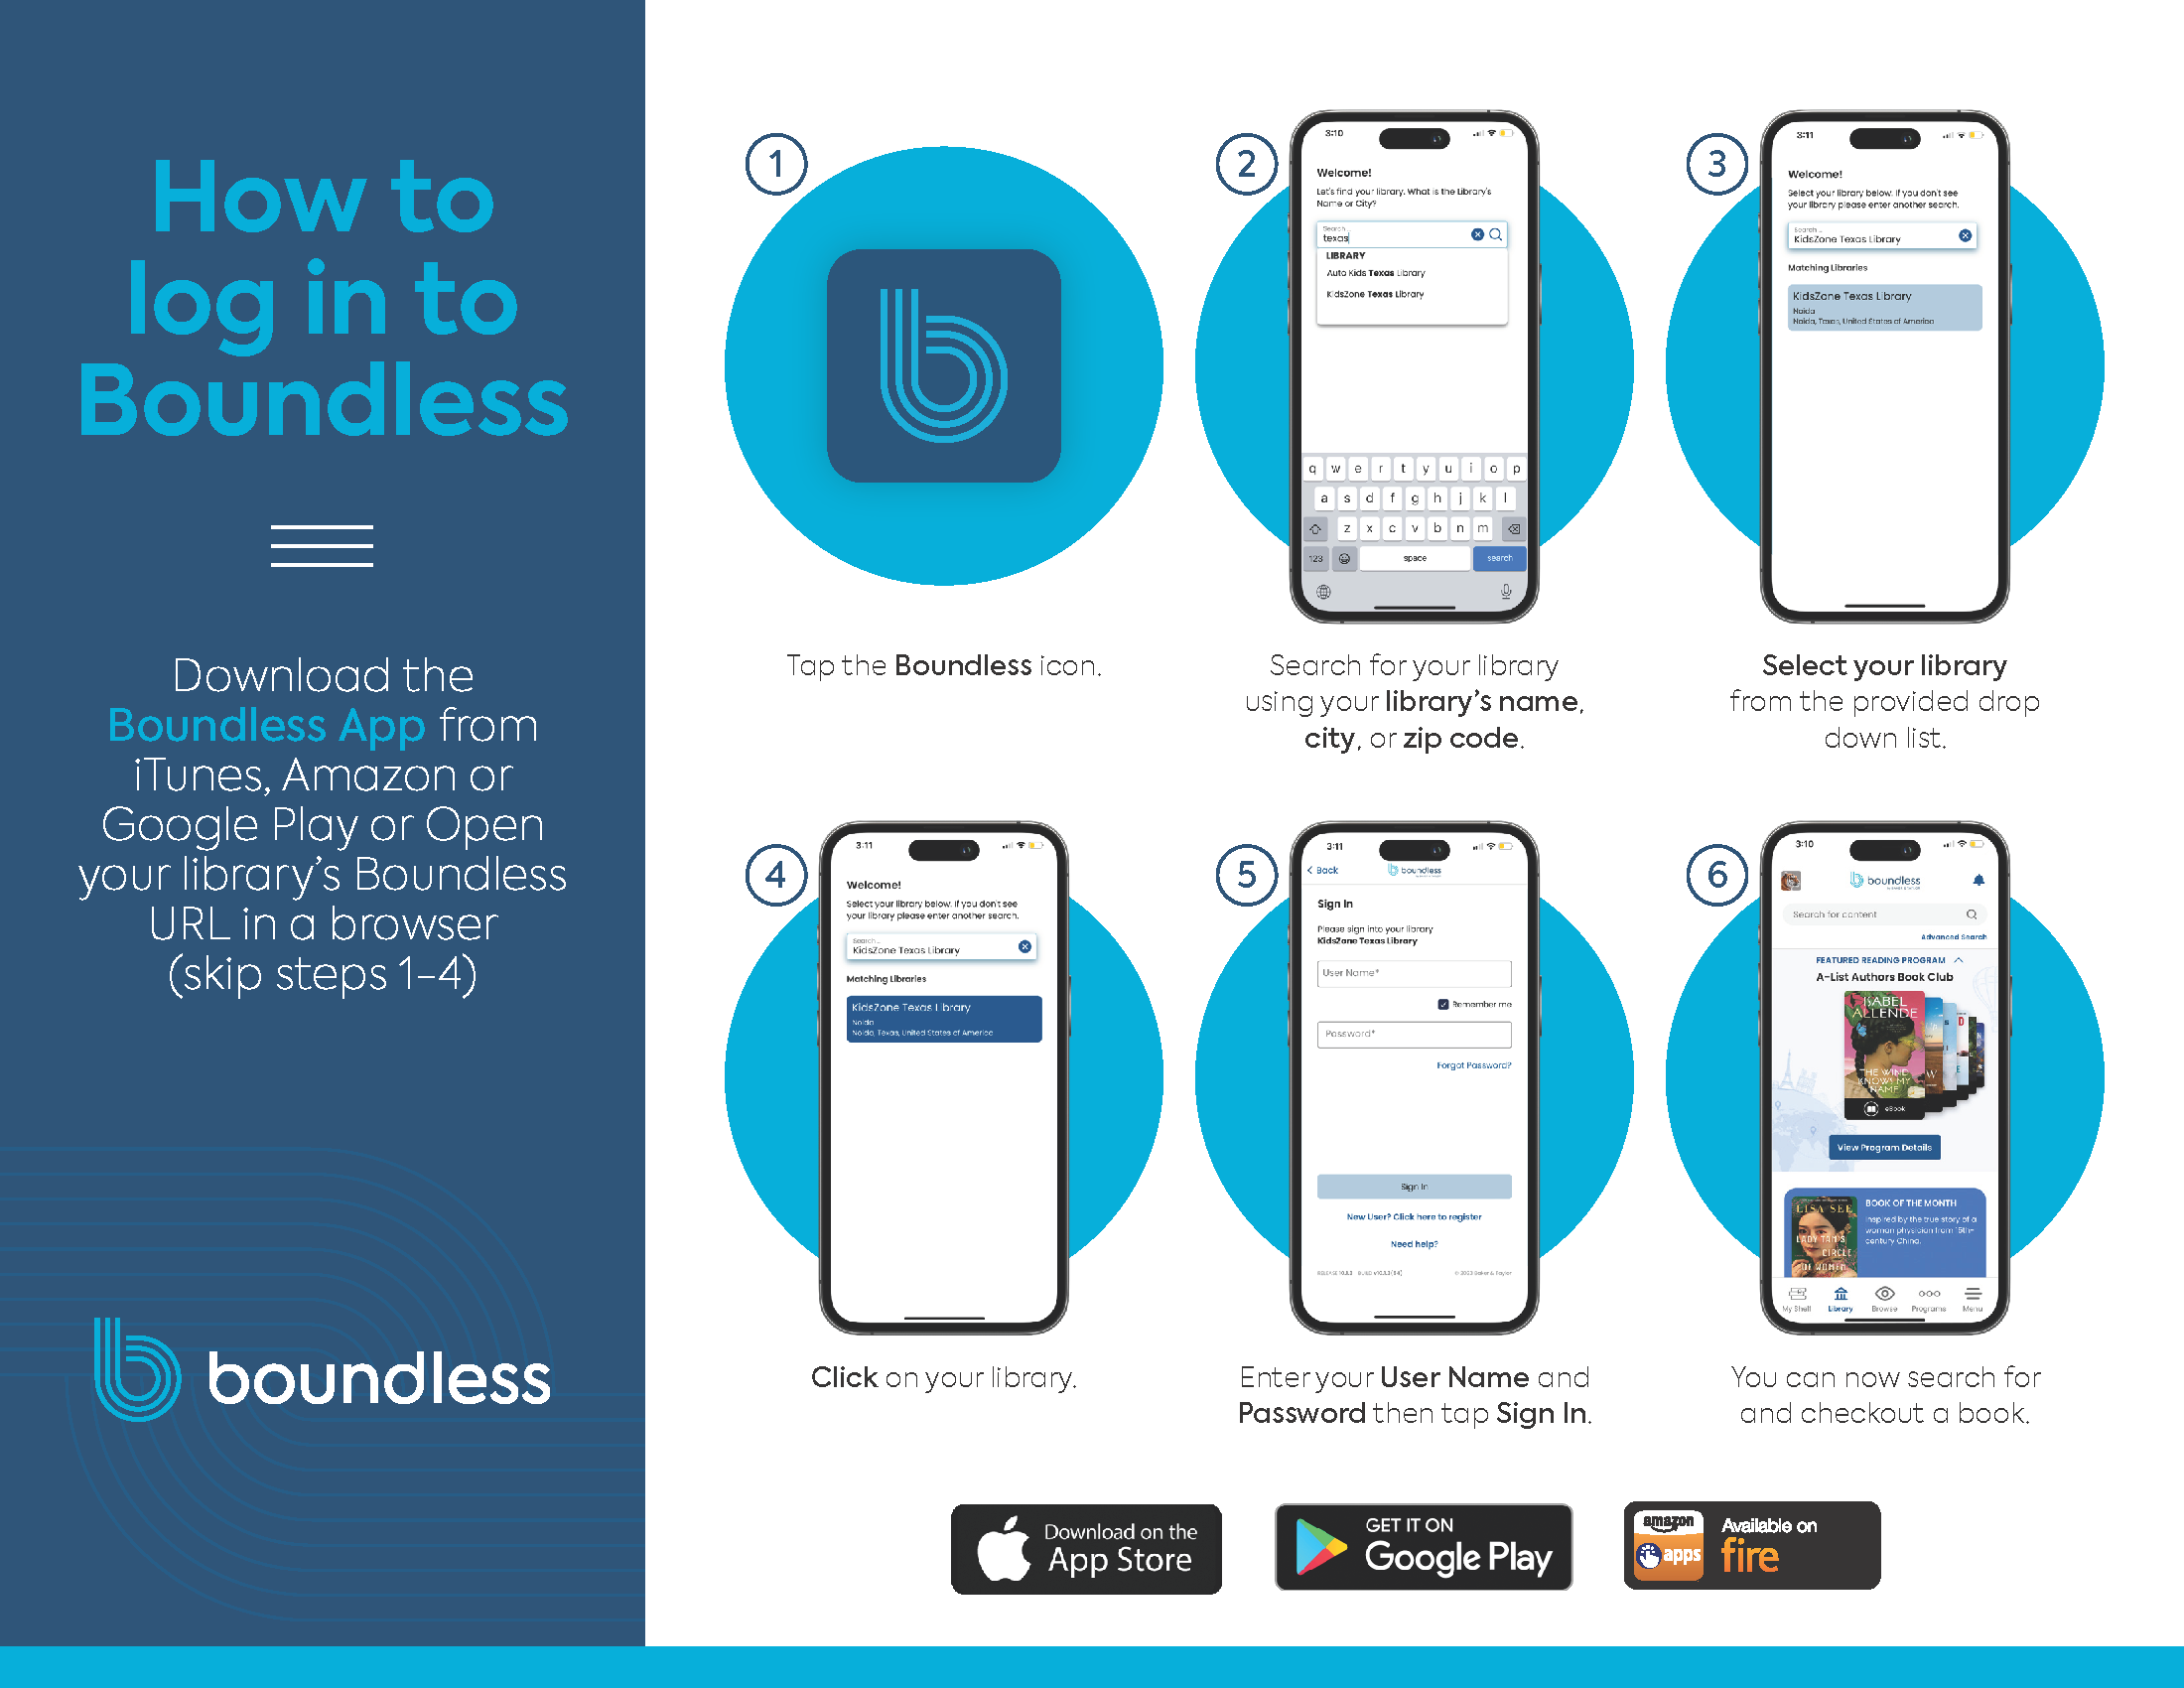 Boundless App instructions, available in PDF